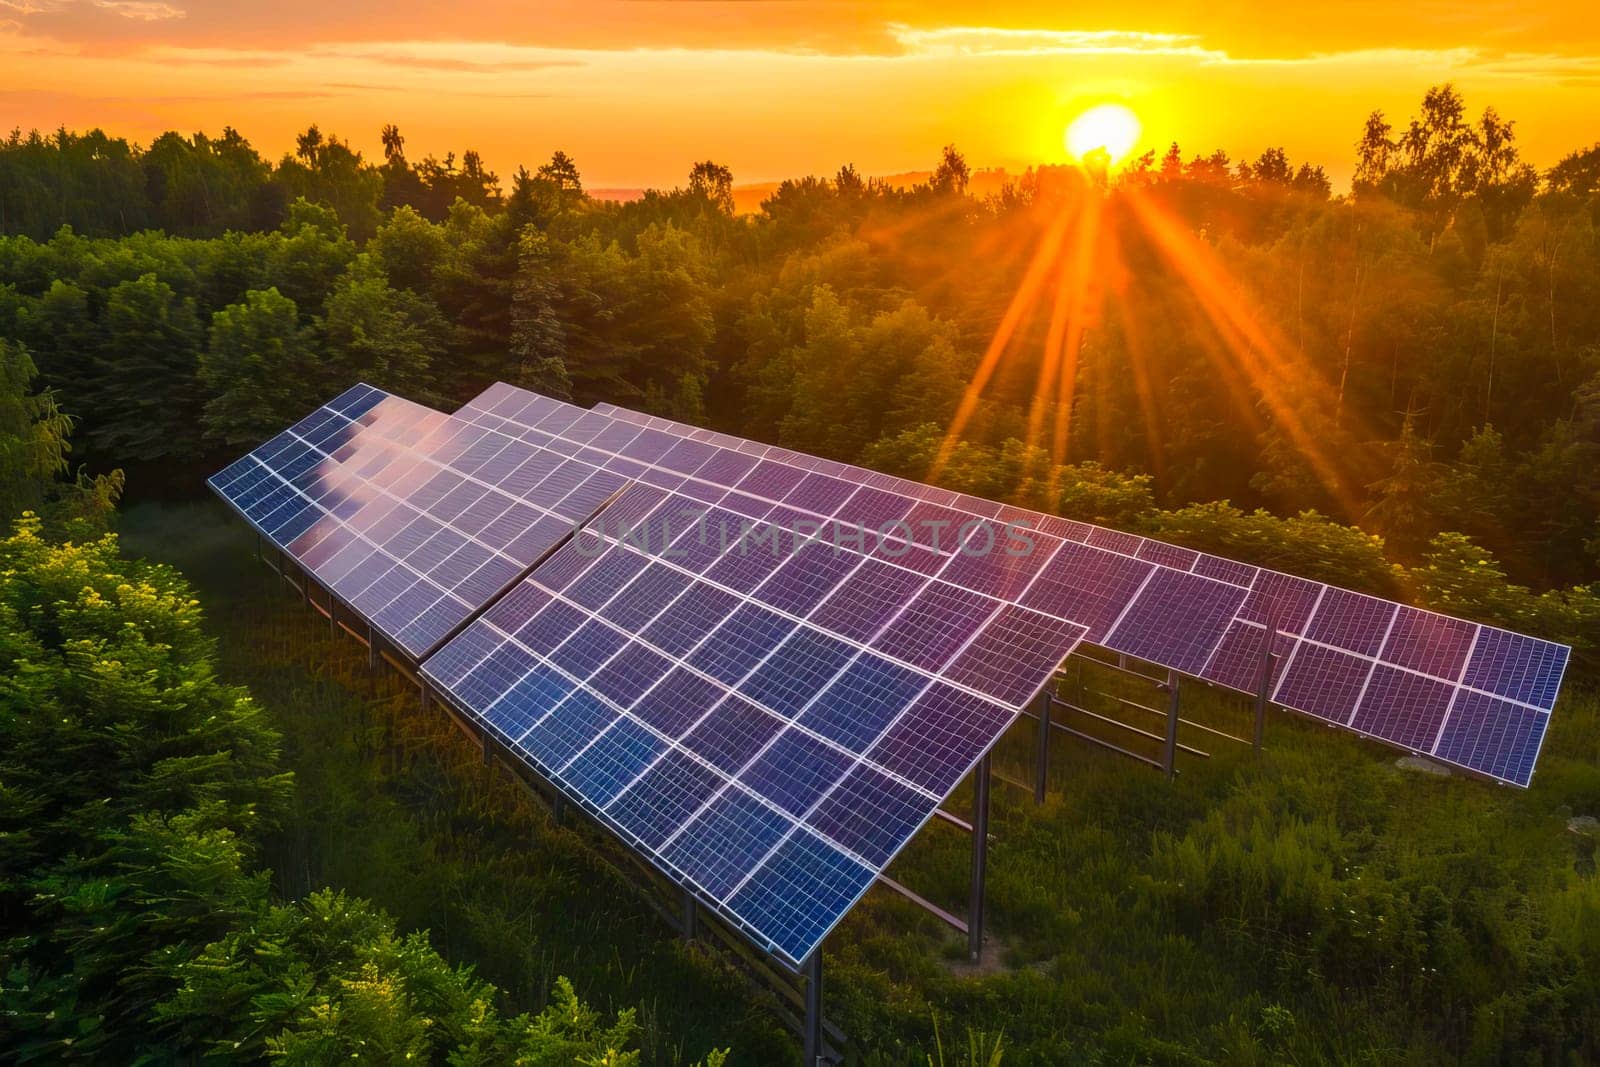 A solar panel stands surrounded by green trees in the forest, utilizing sunlight for renewable energy.